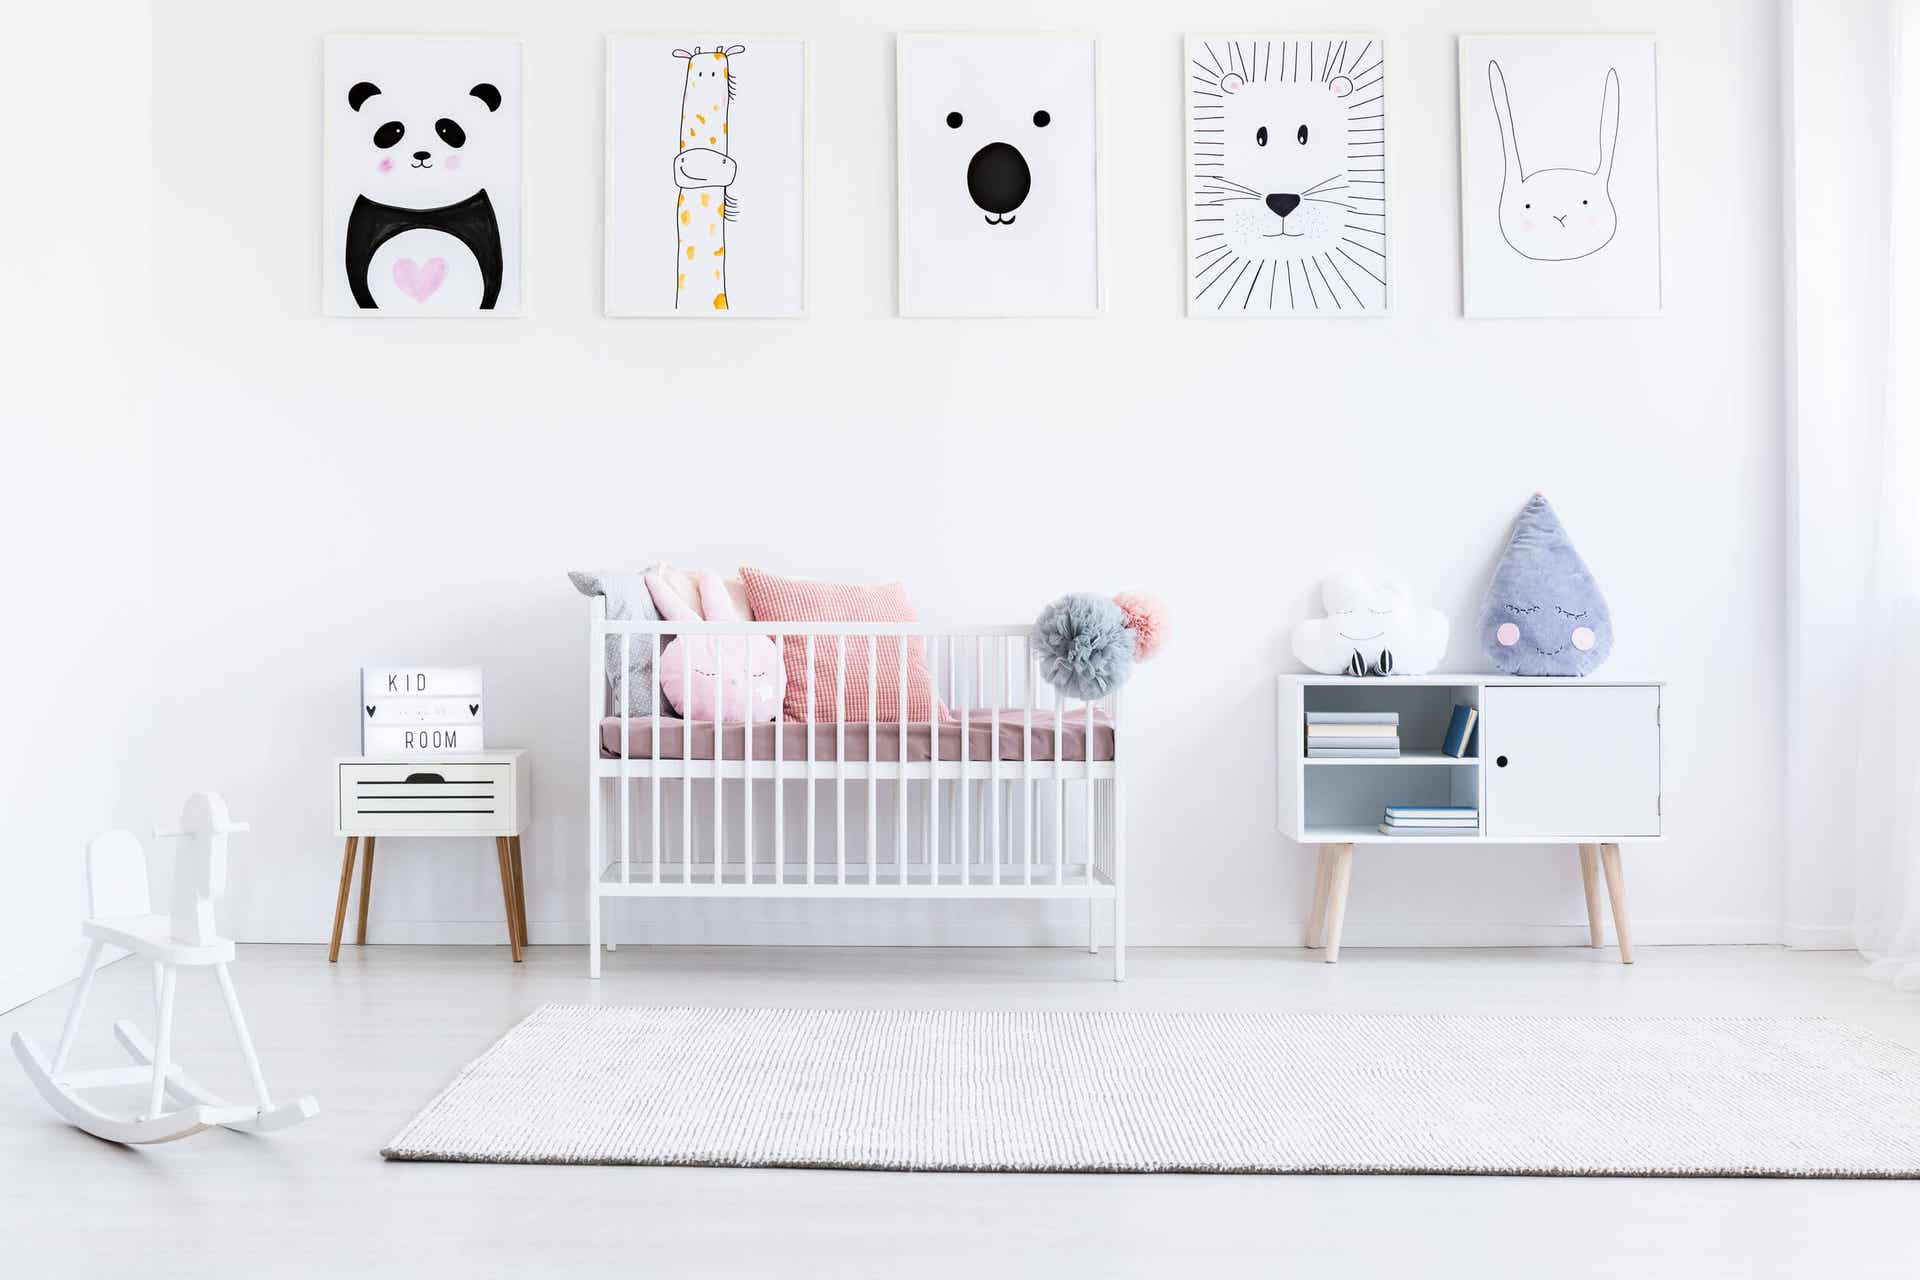 Animal wall art hanging in a child's bedroom.